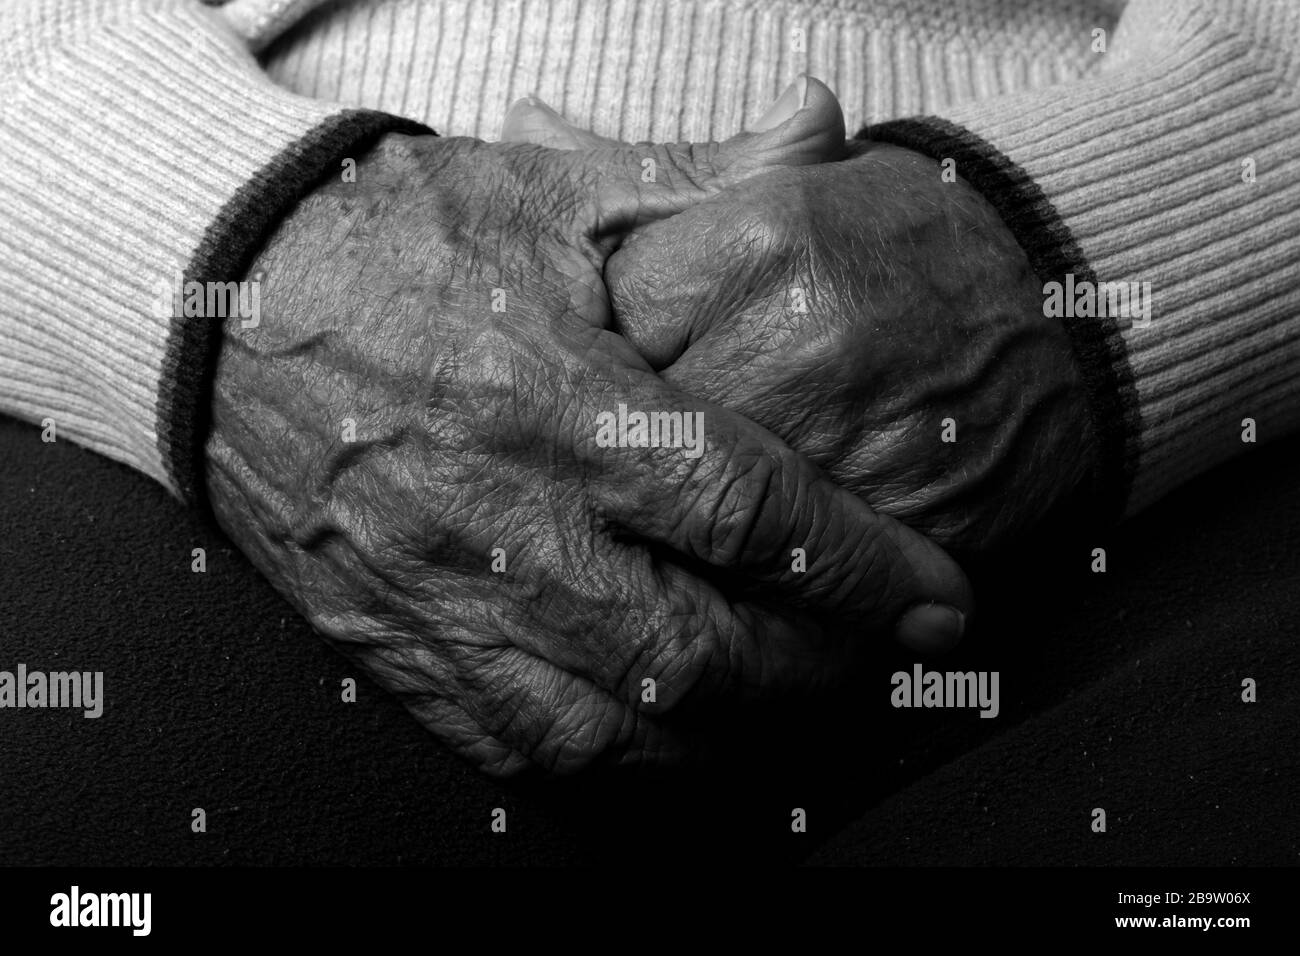 Alexandria, Egypt January 14, 2020  black and white photo of an 87 year old man with wrinkles on his face and old hands Stock Photo